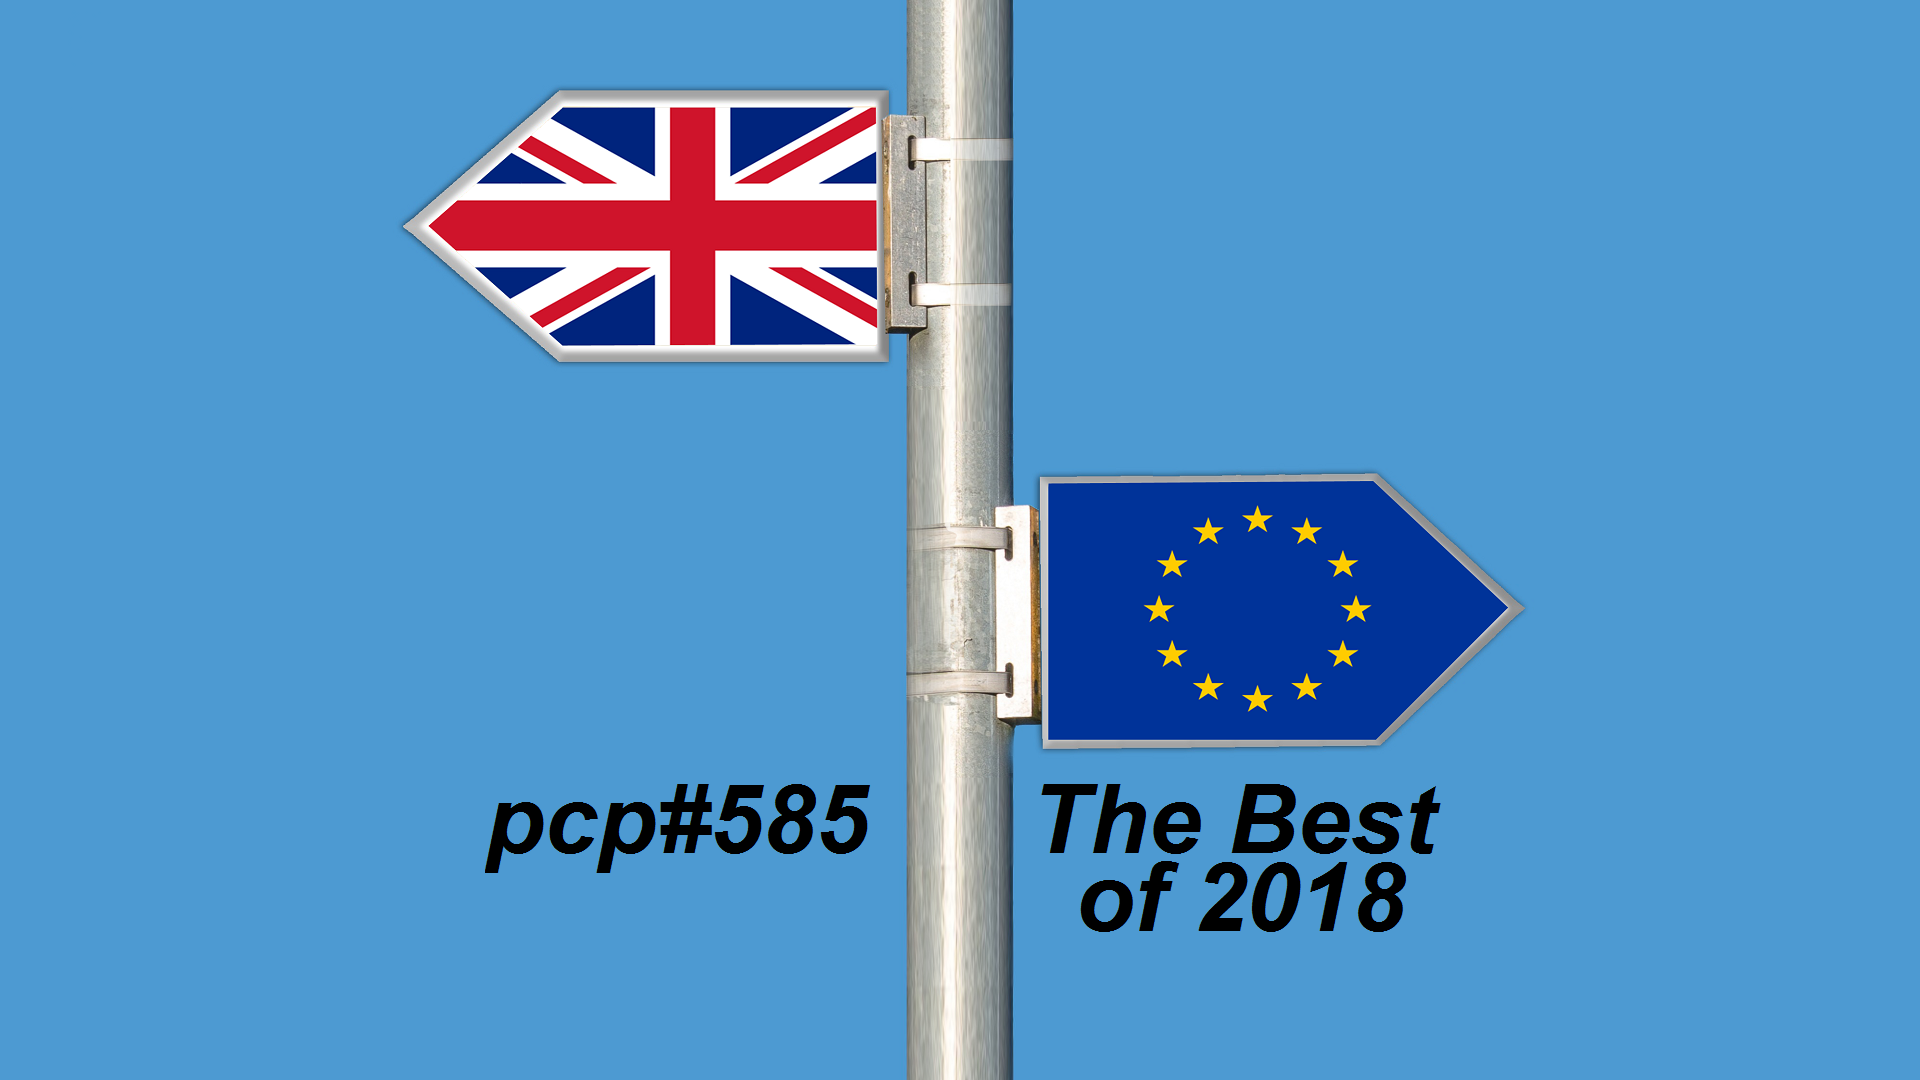 PCP#585... Best of 2018...